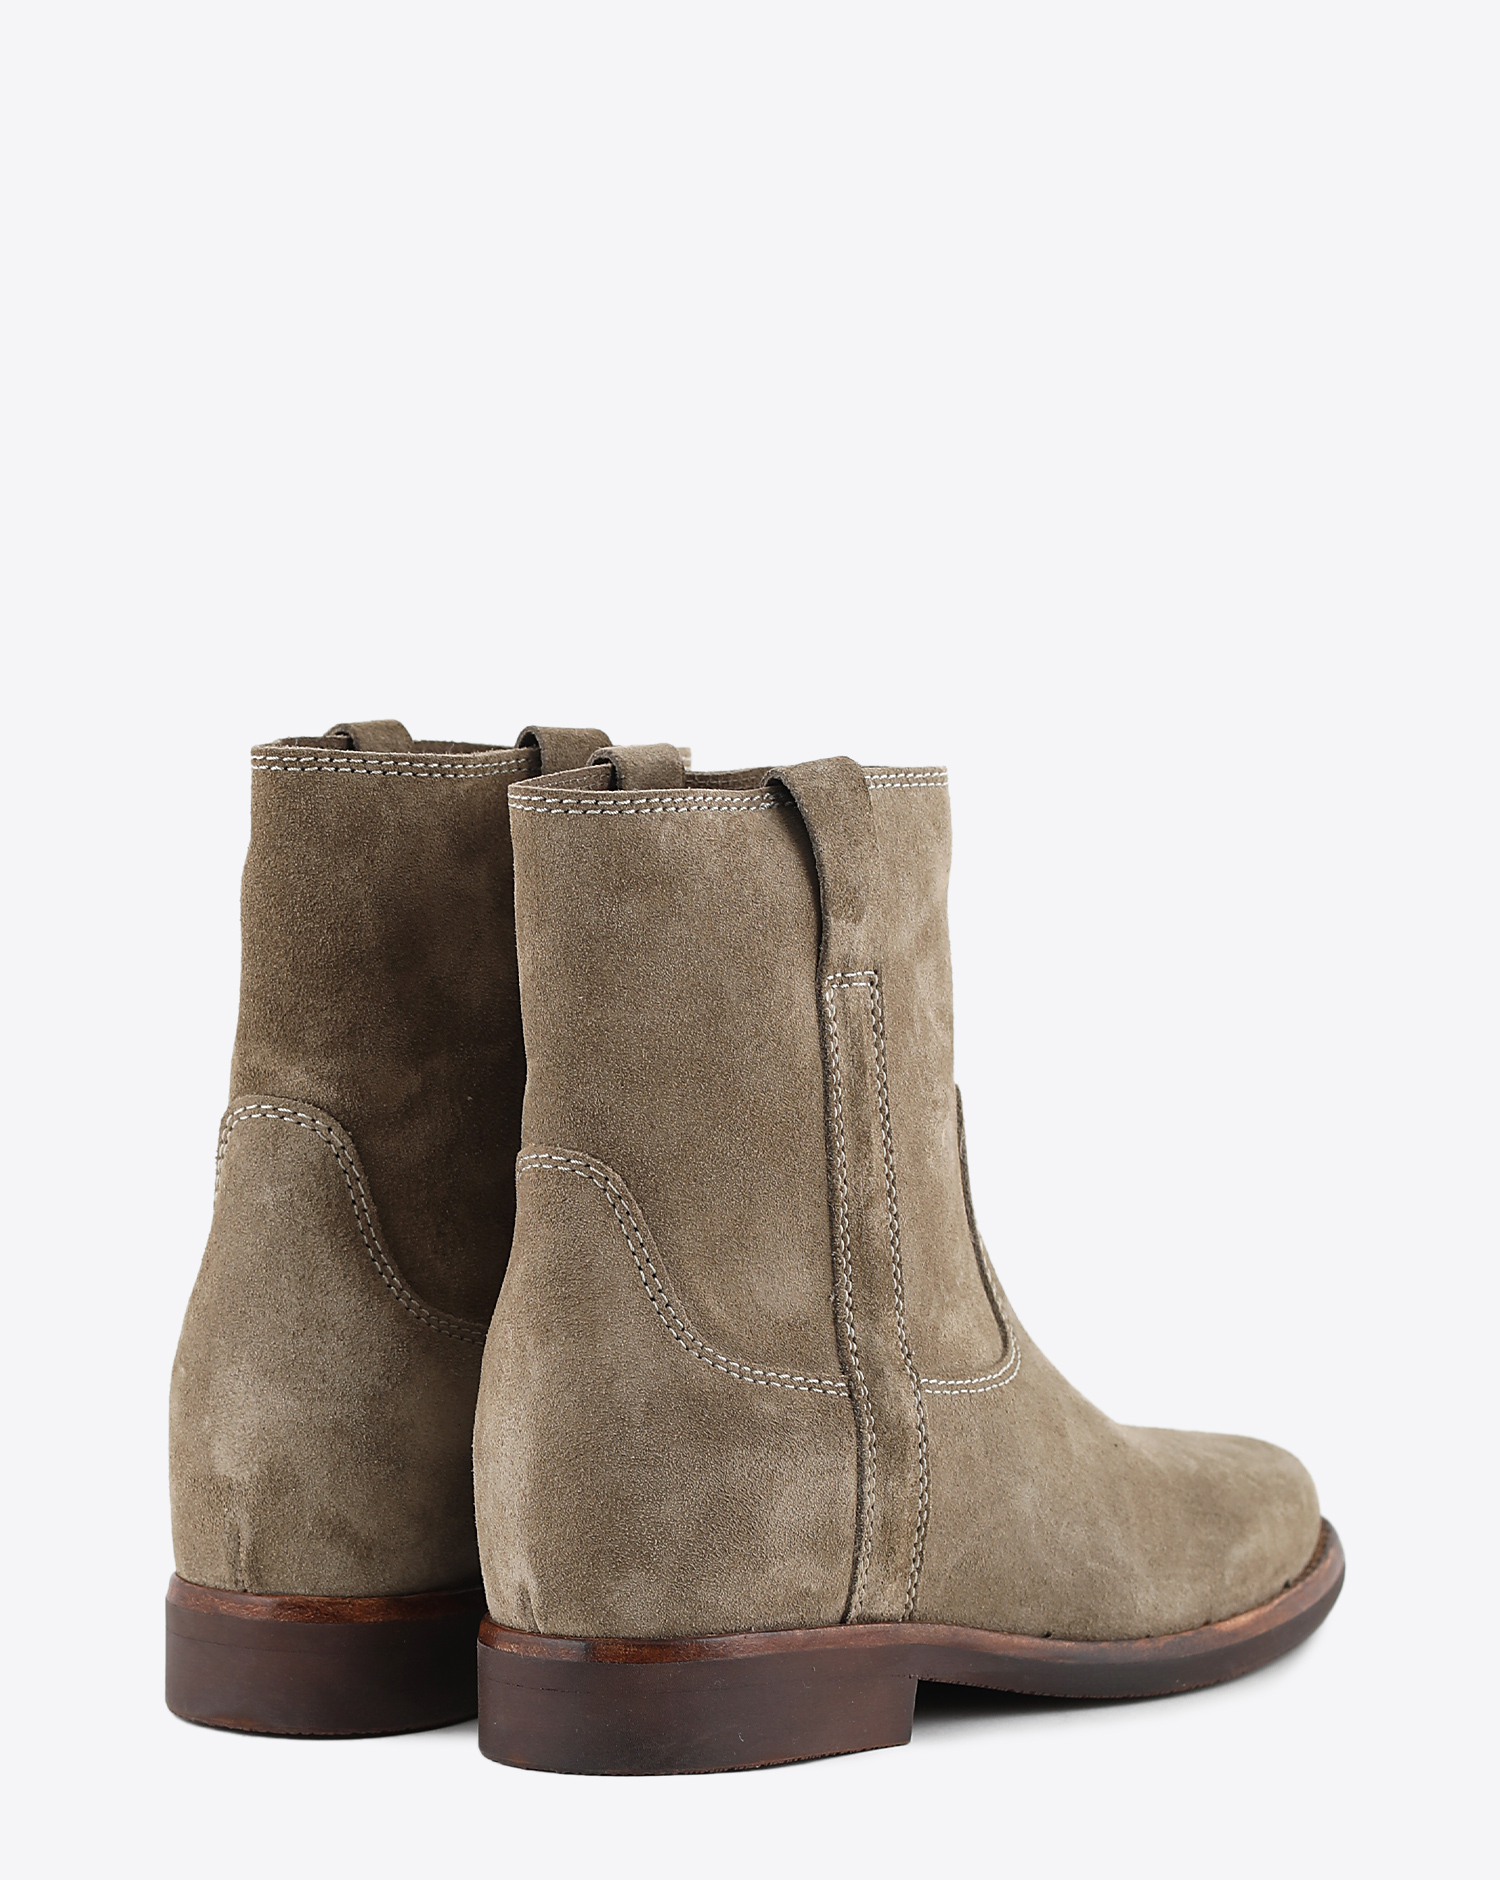 Boots Susee Isabel Marant Étoile Taupe